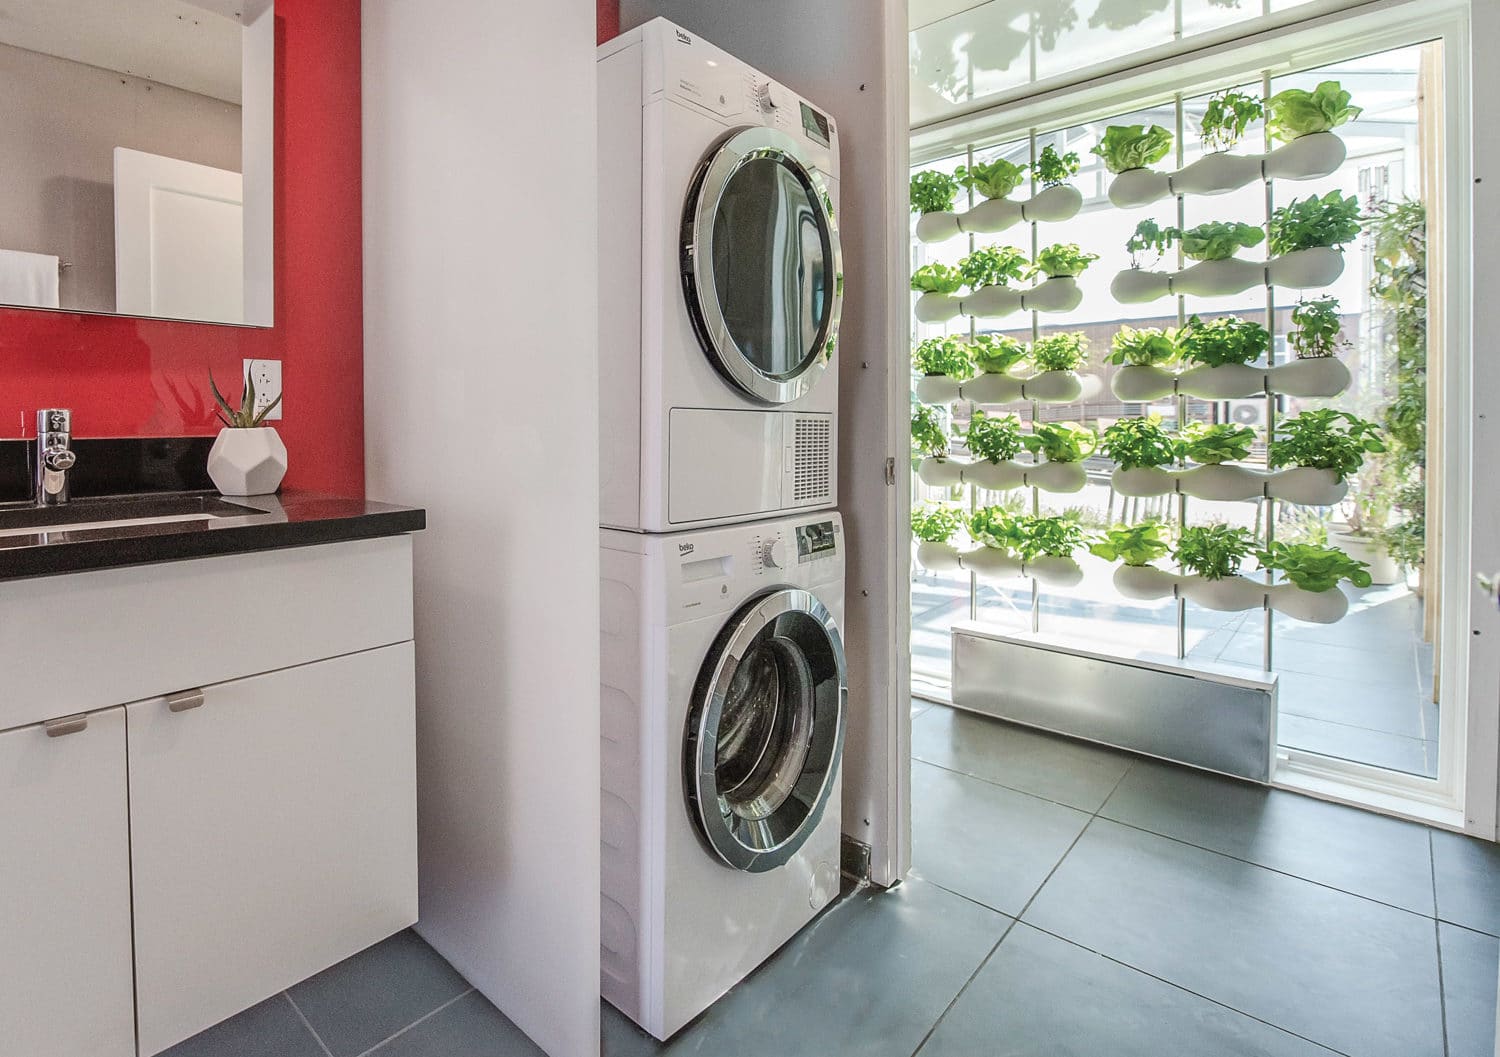 Beko US is Making Our Appliances More Efficient